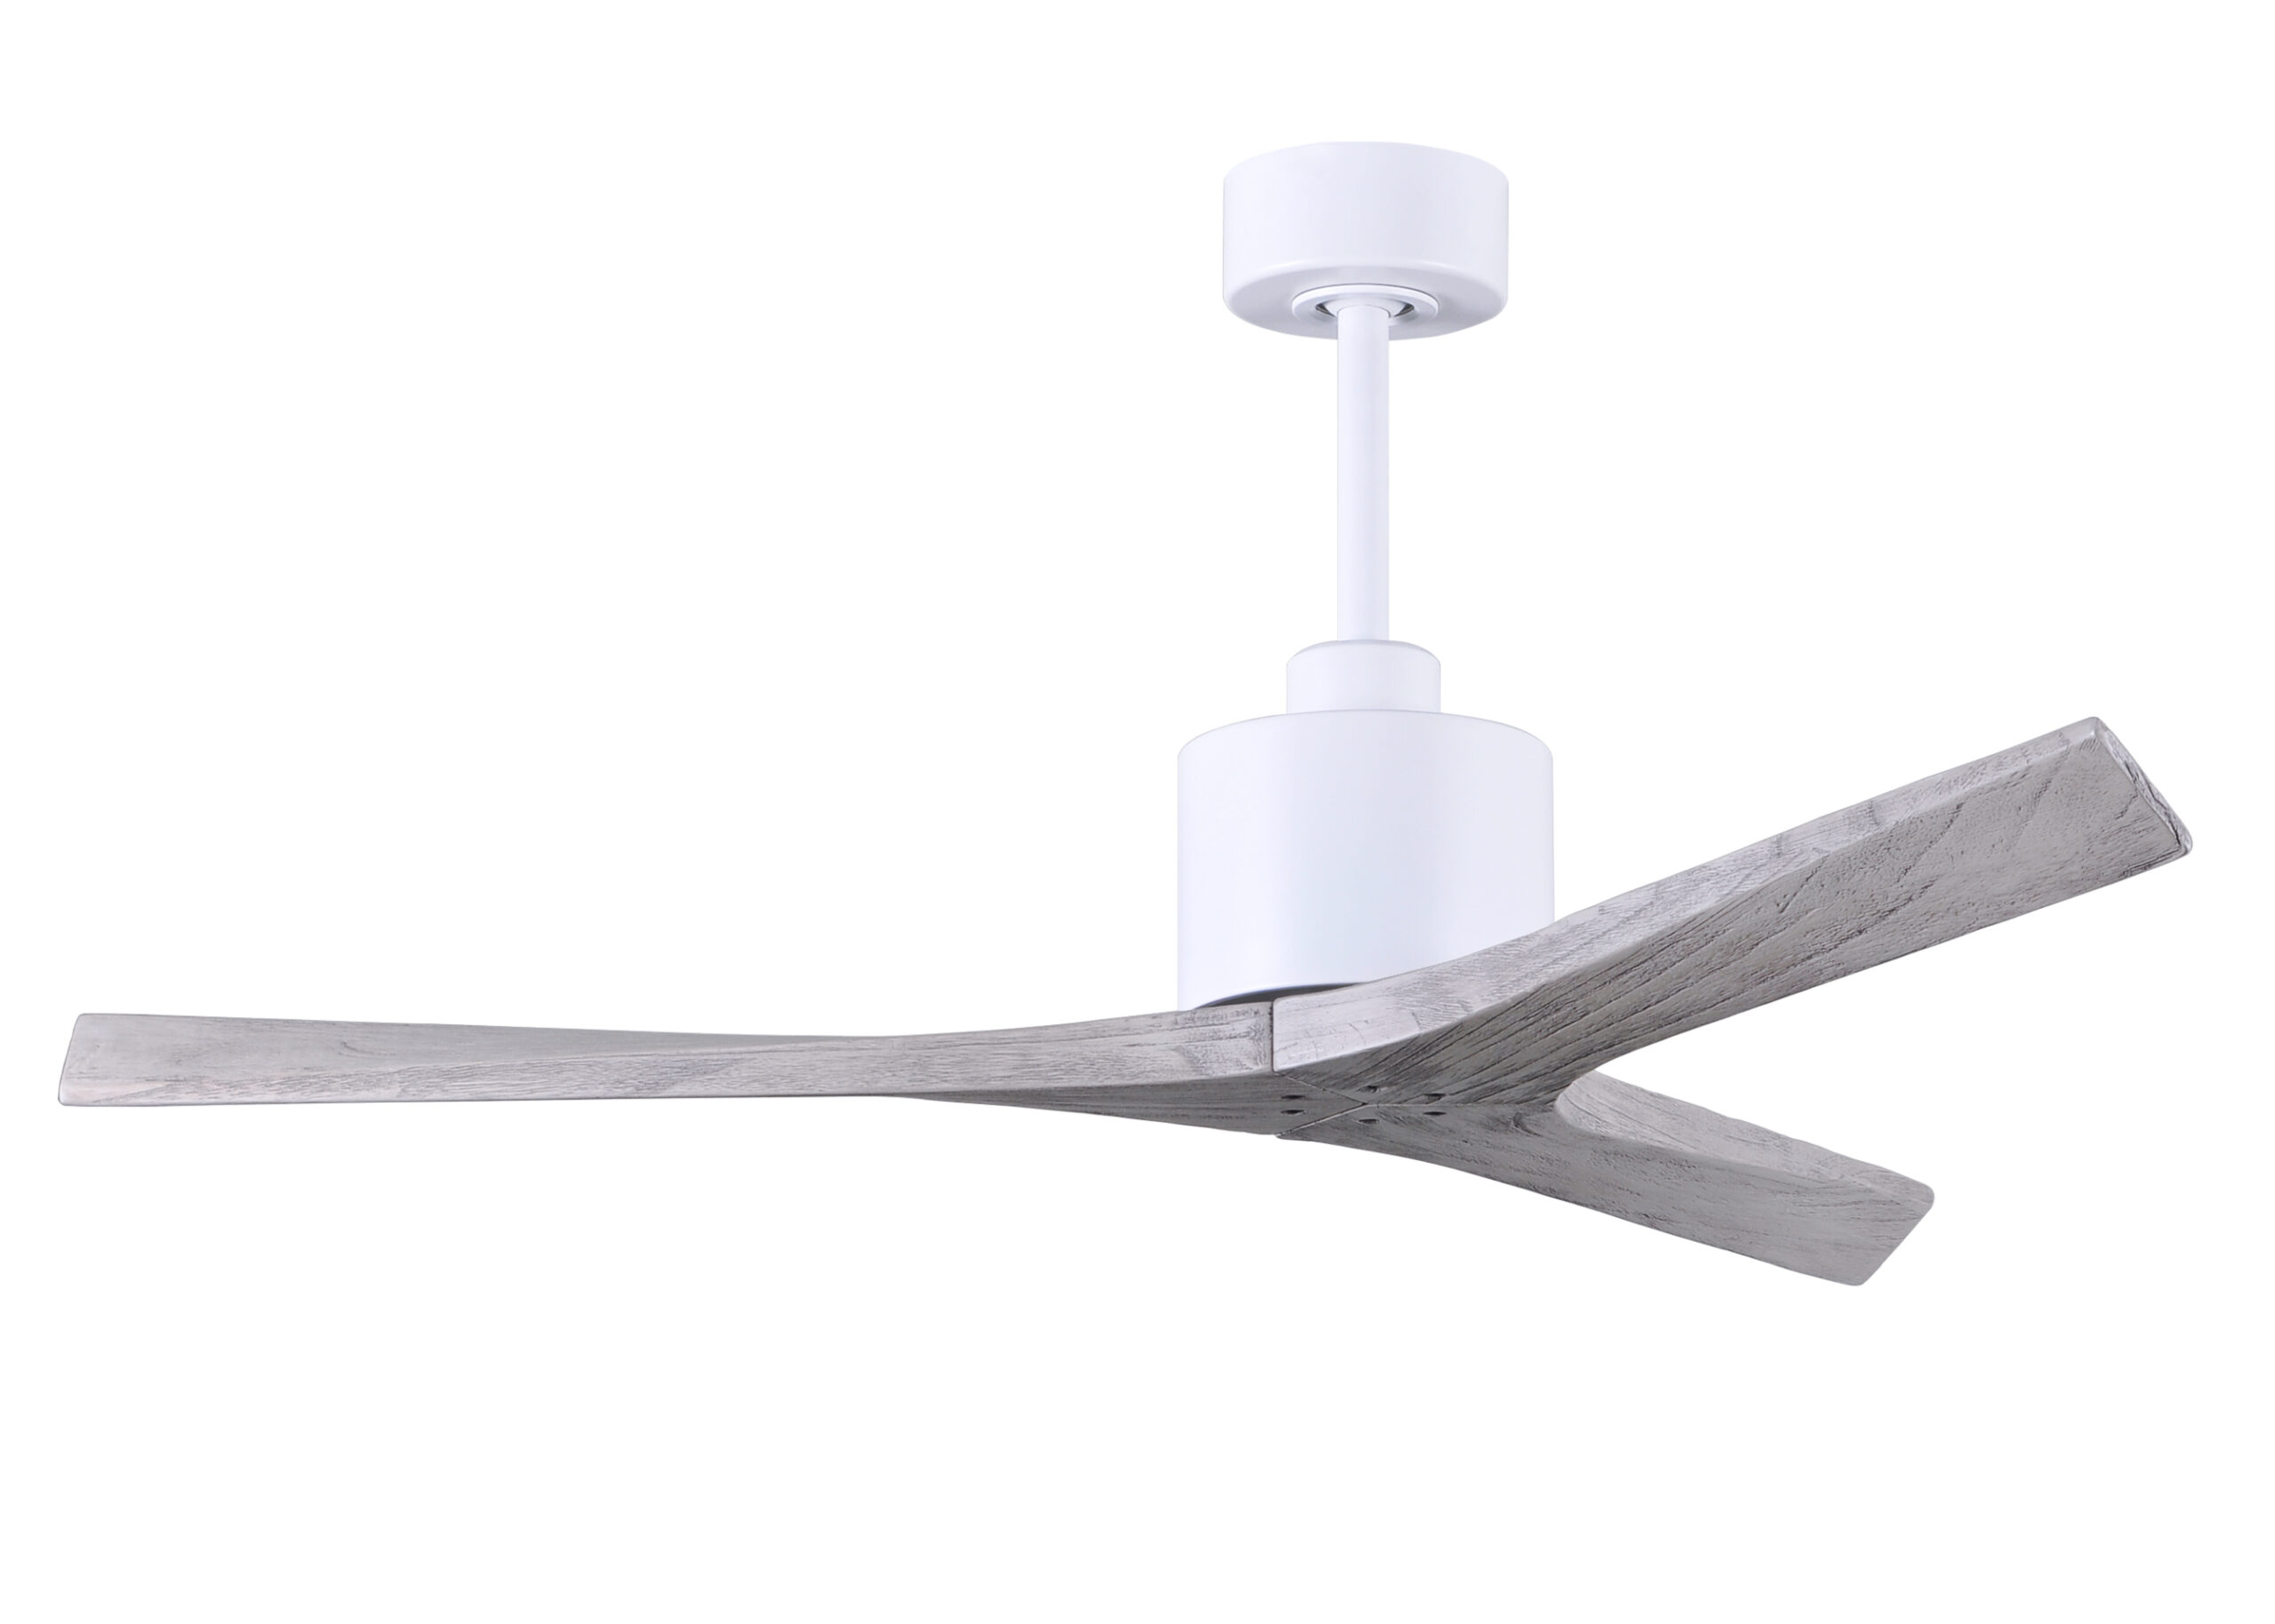 Mollywood ceiling fan in Matte White with 52” Barn Wood blade